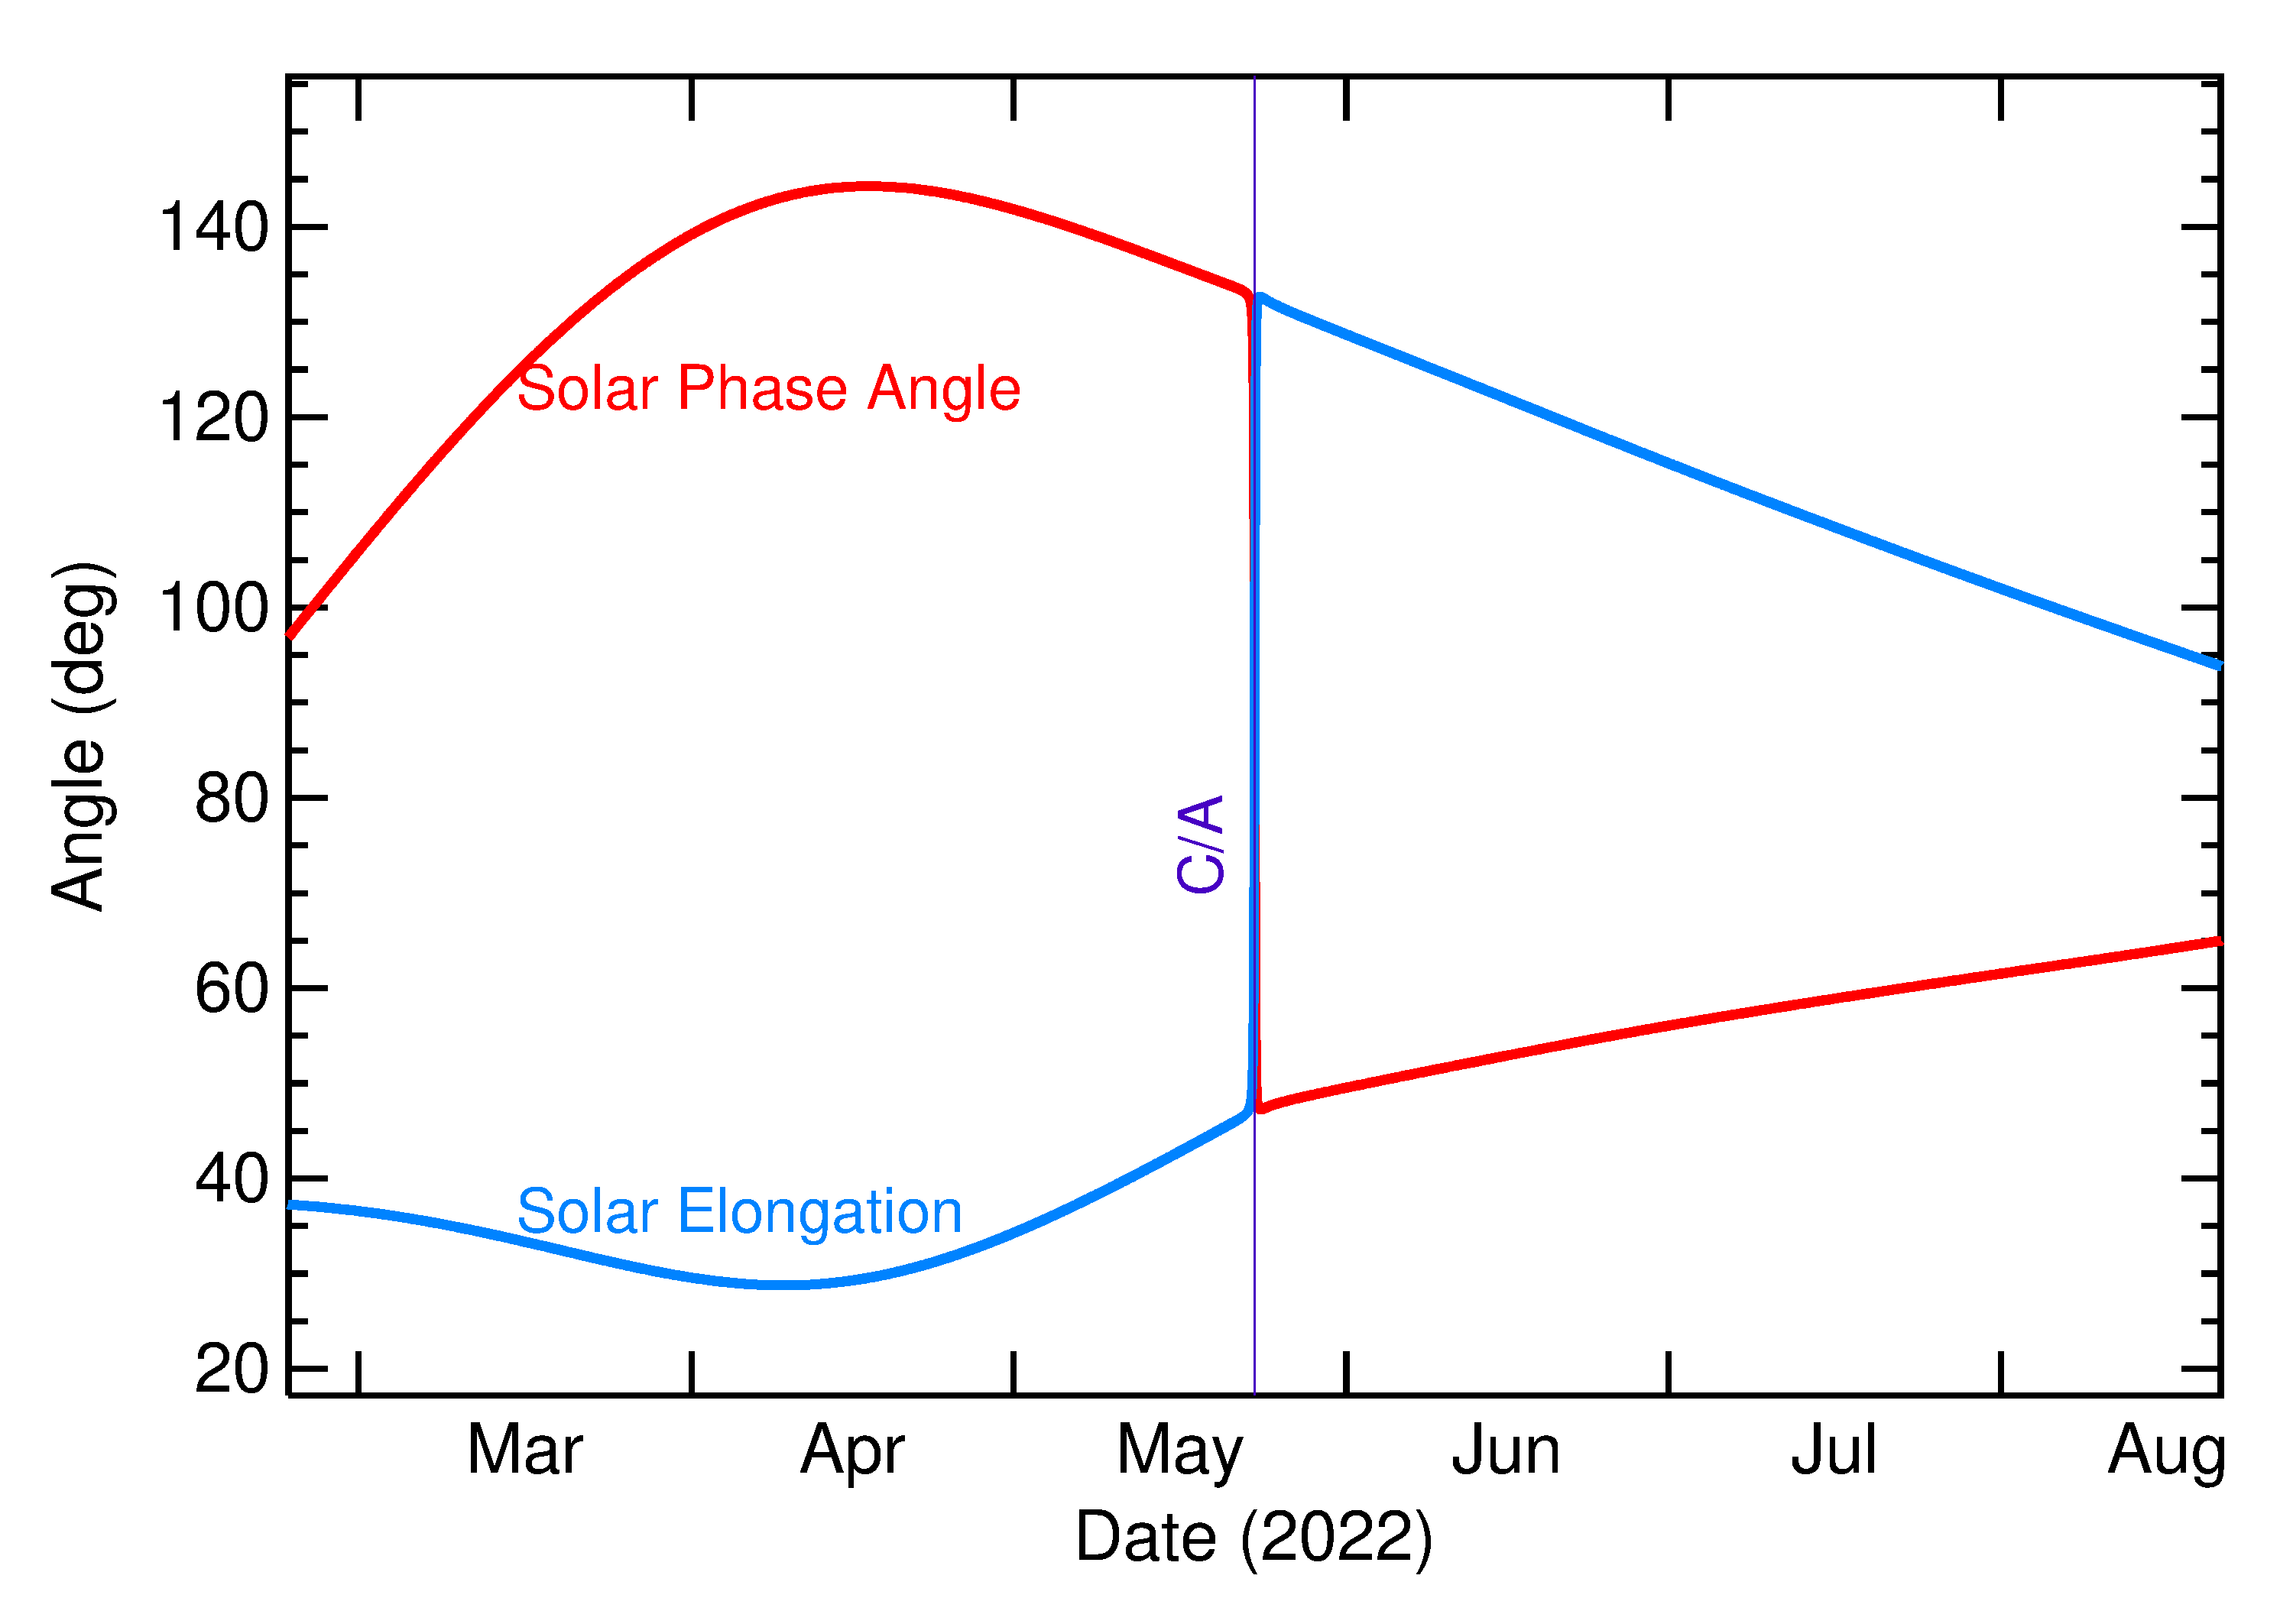 Solar Elongation and Solar Phase Angle of 2022 KG1 in the months around closest approach